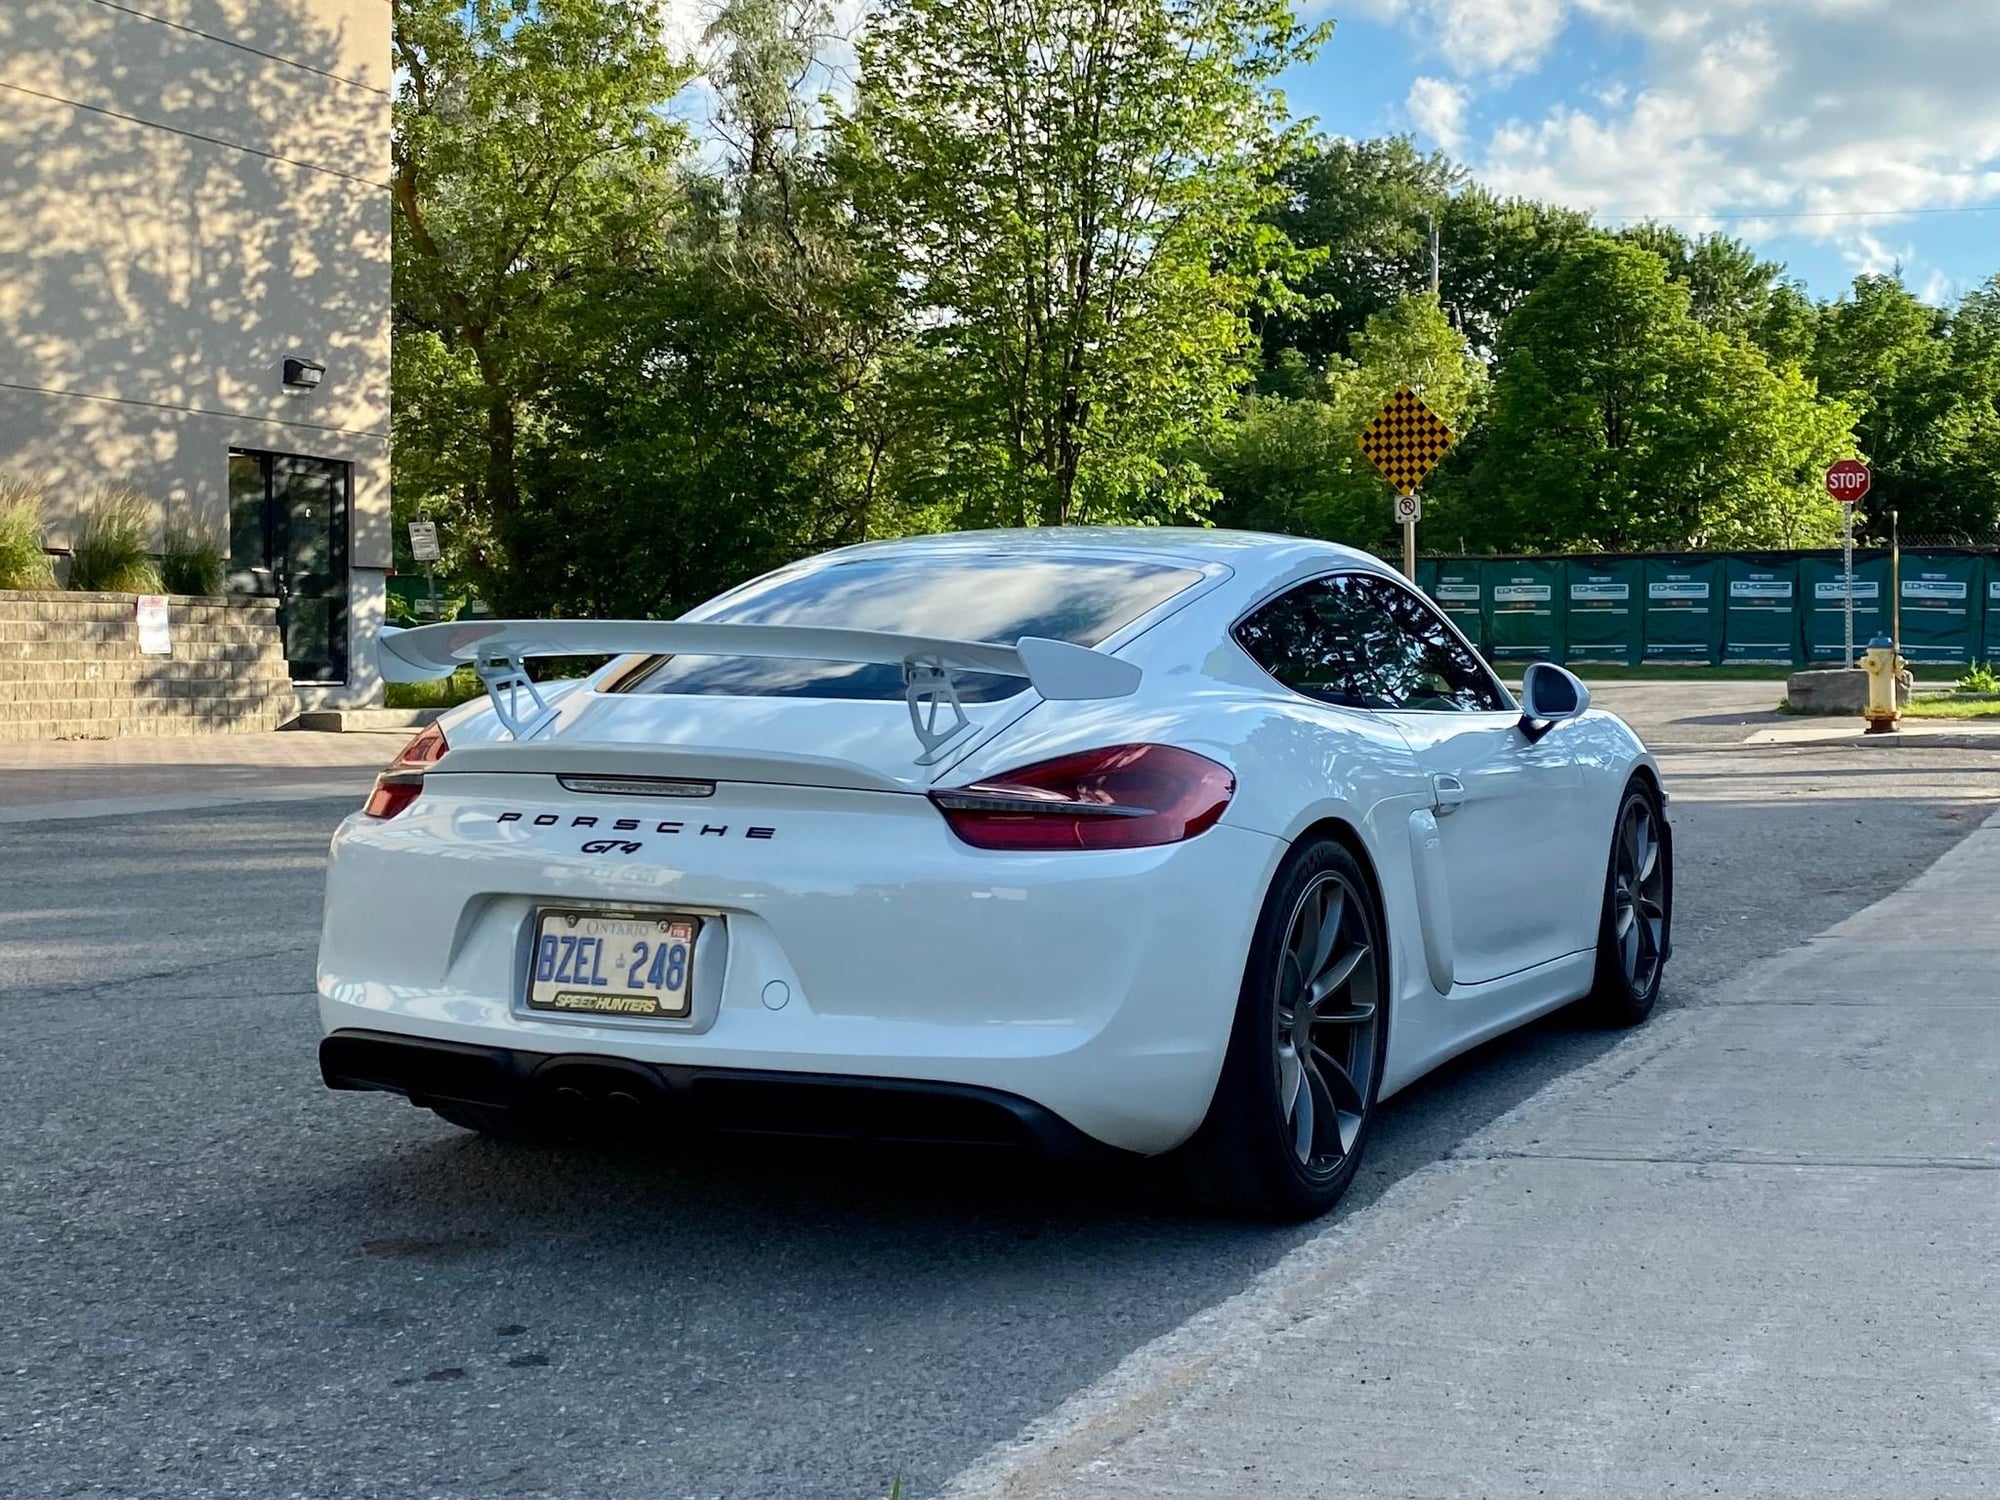 2016 Porsche Cayman GT4 - 2016 Cayman GT4 (white, LWB, full XPEL, unmodified) - Used - VIN WP0AC2A85GK197158 - 10,500 Miles - 6 cyl - 2WD - Manual - Coupe - White - Ottawa, ON K1V7G1, Canada